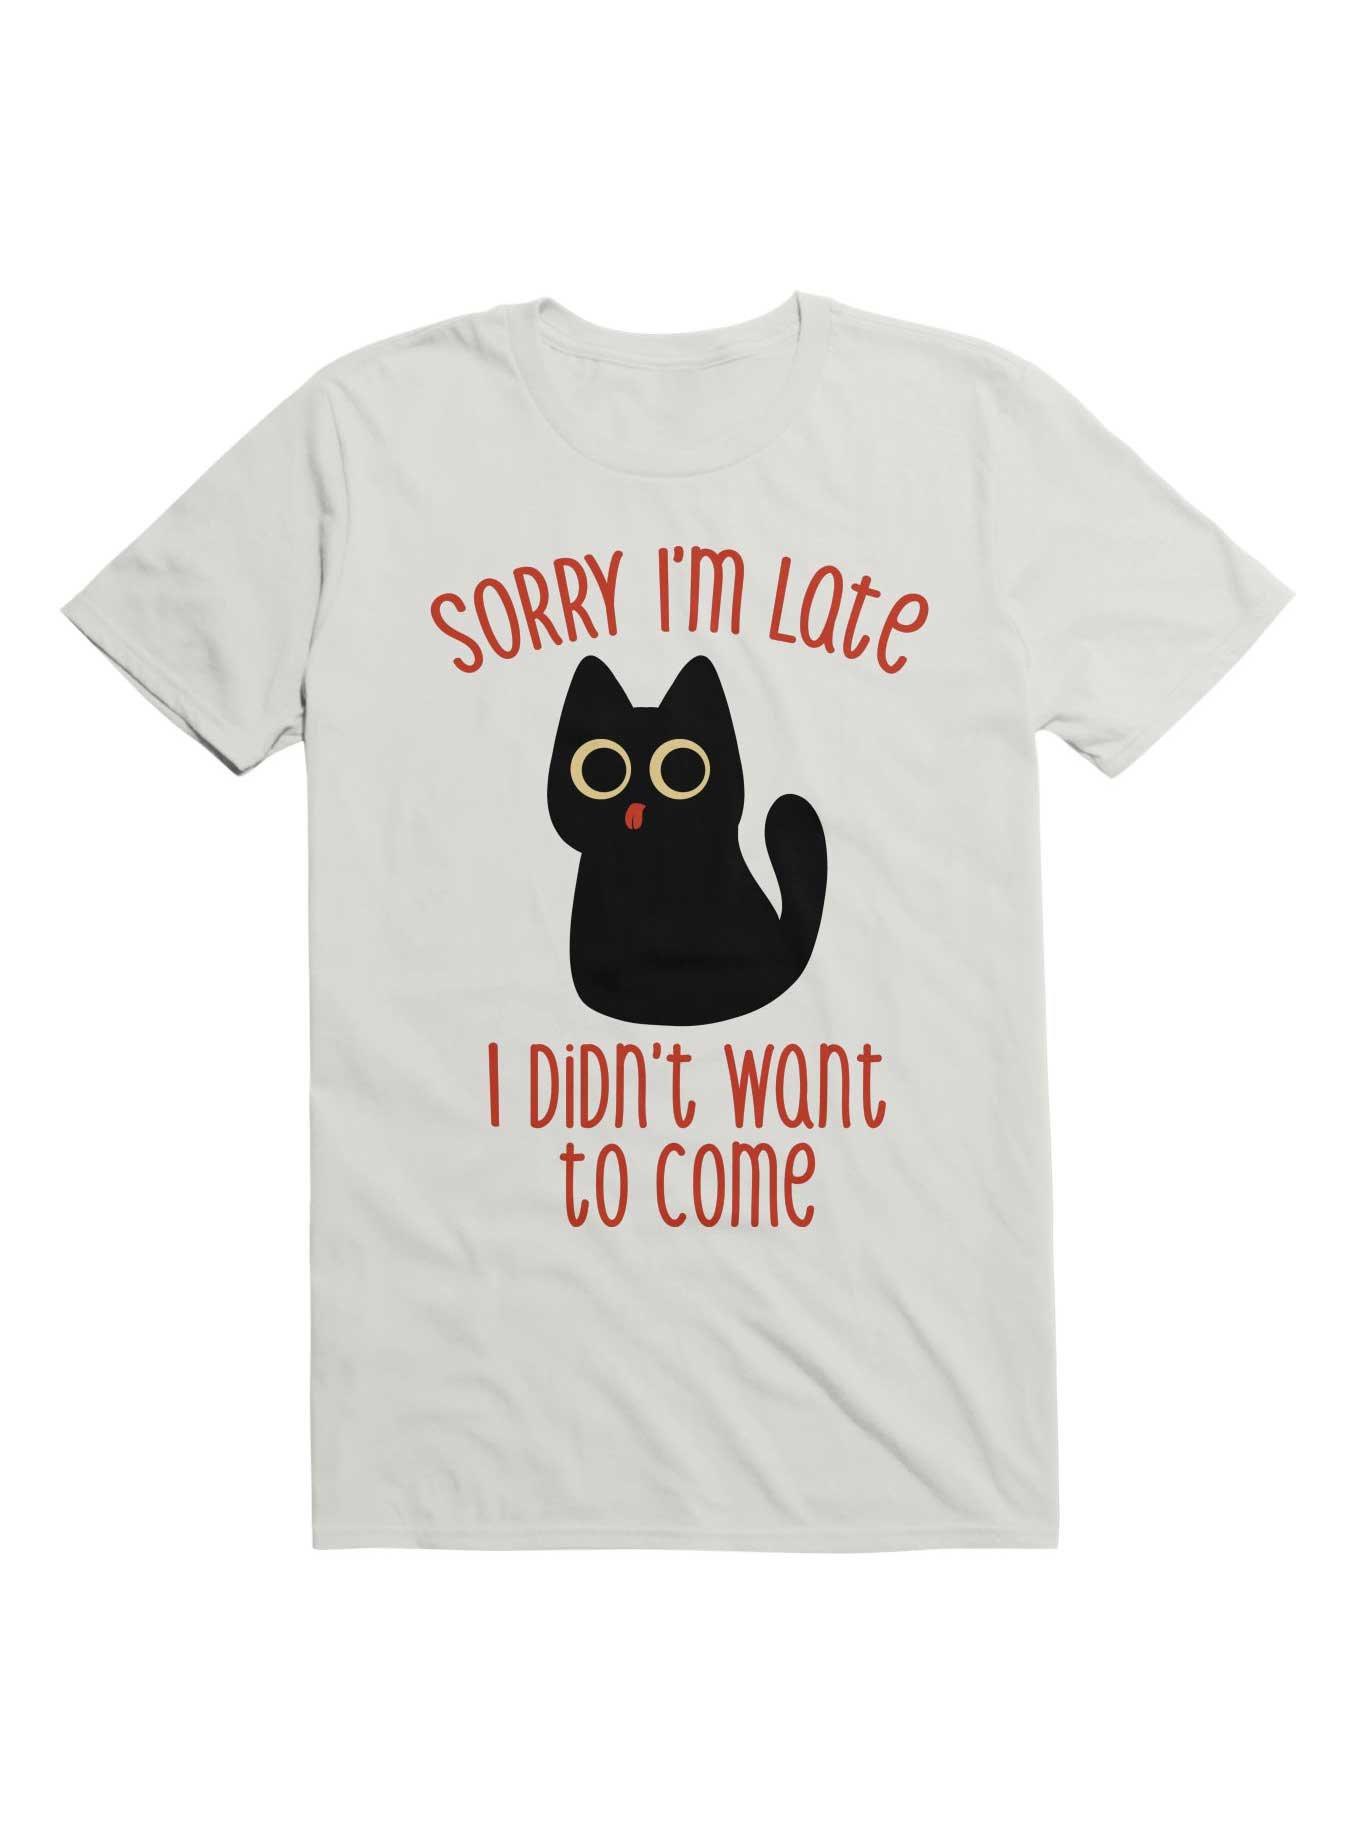 Sorry I'm Late I Didn't Want to Come Black Cat T-Shirt, WHITE, hi-res